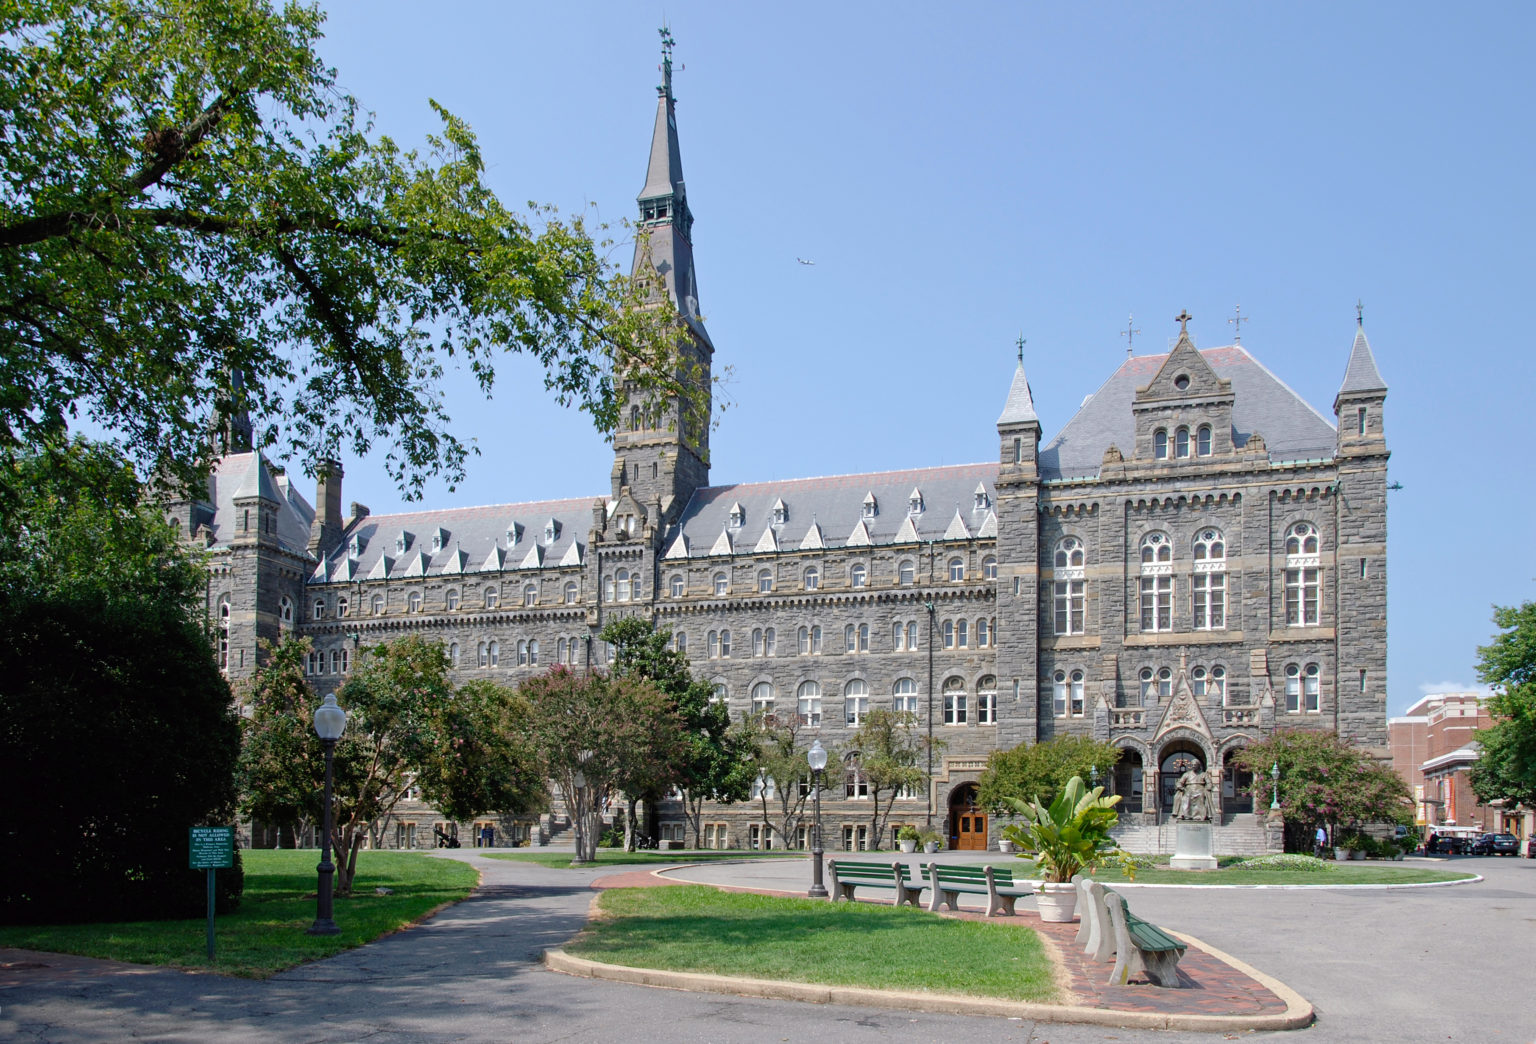 The Georgetown McDonough MBA Program: An Overview